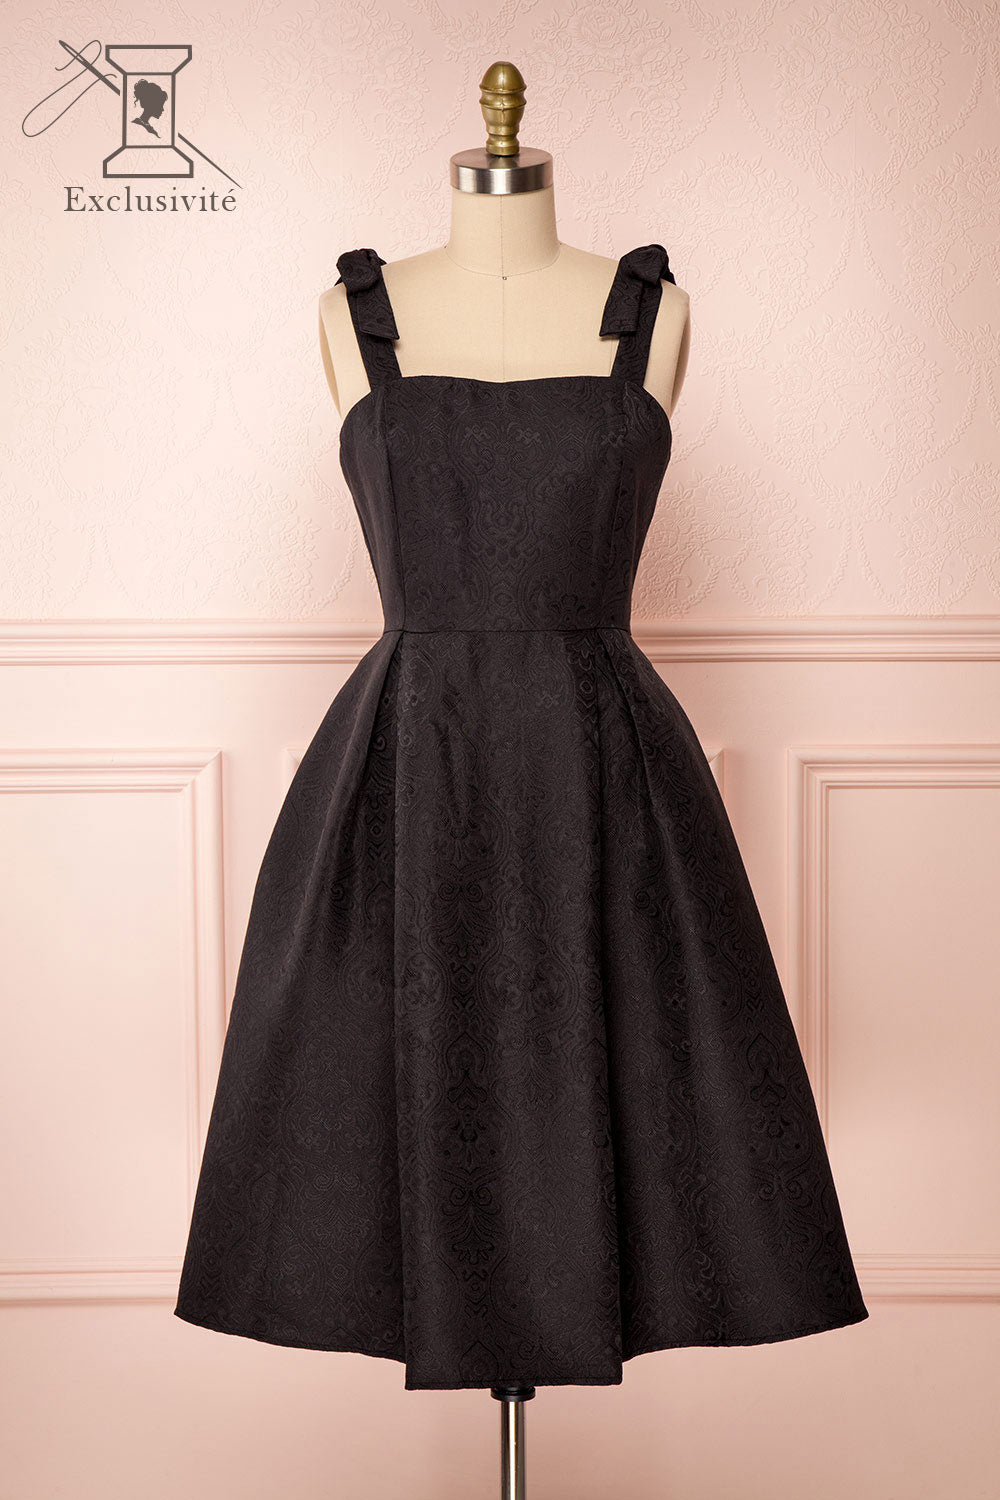 Cybill Black Brocade A-Line Cocktail Dress with Bows | Boutique 1861